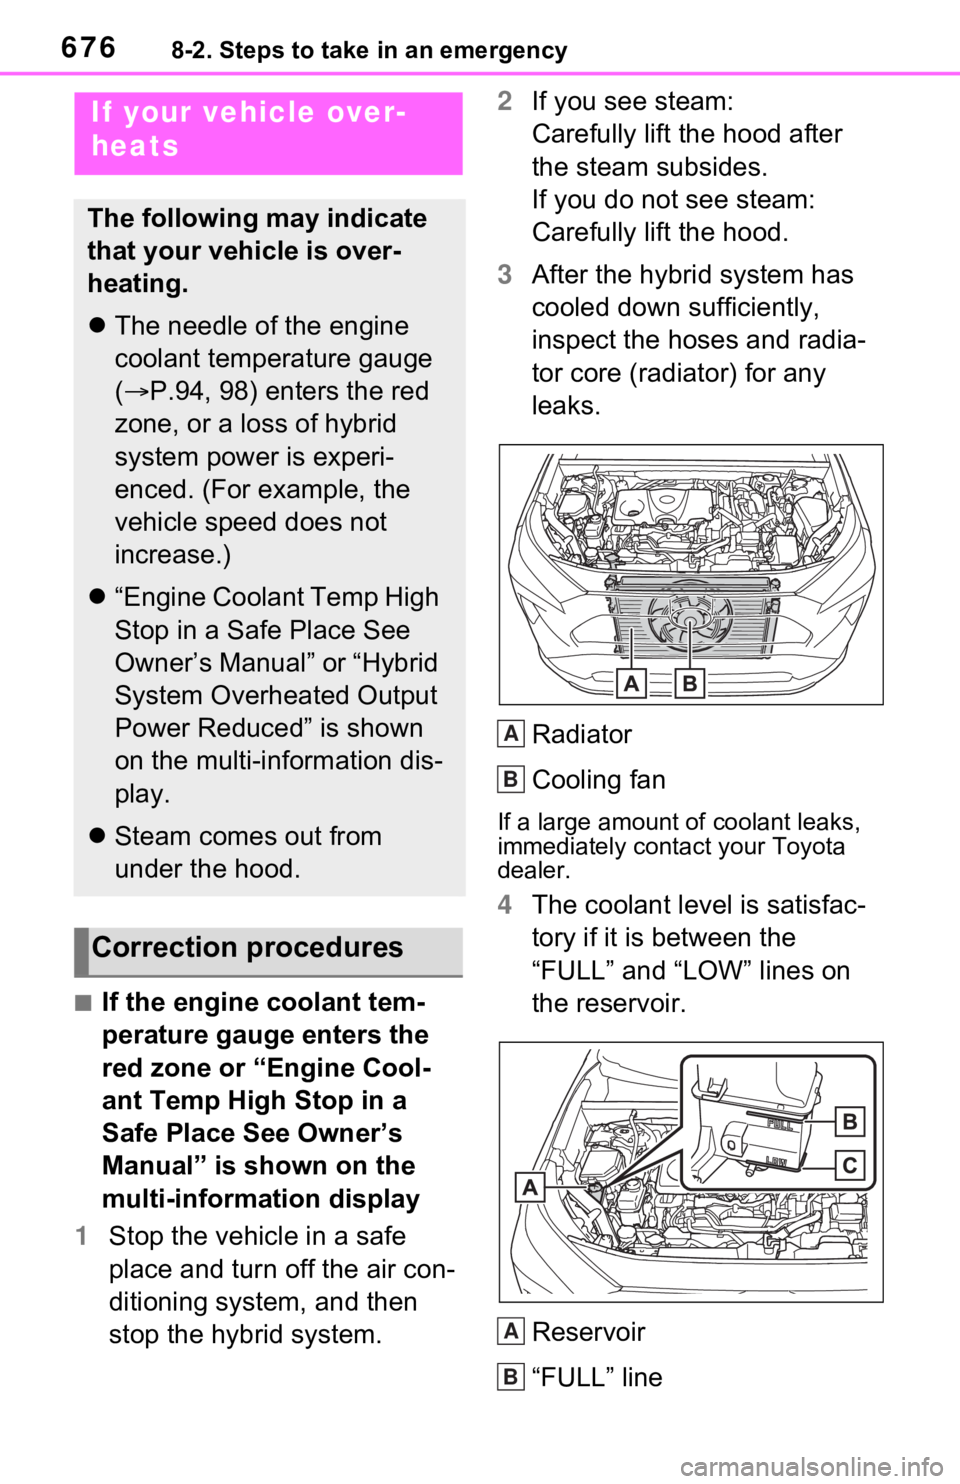 TOYOTA RAV4 HYBRID 2021  Owners Manual 6768-2. Steps to take in an emergency
■If the engine coolant tem-
perature gauge enters the 
red zone or “Engine Cool-
ant Temp High Stop in a 
Safe Place See Owner’s 
Manual” is shown on the 